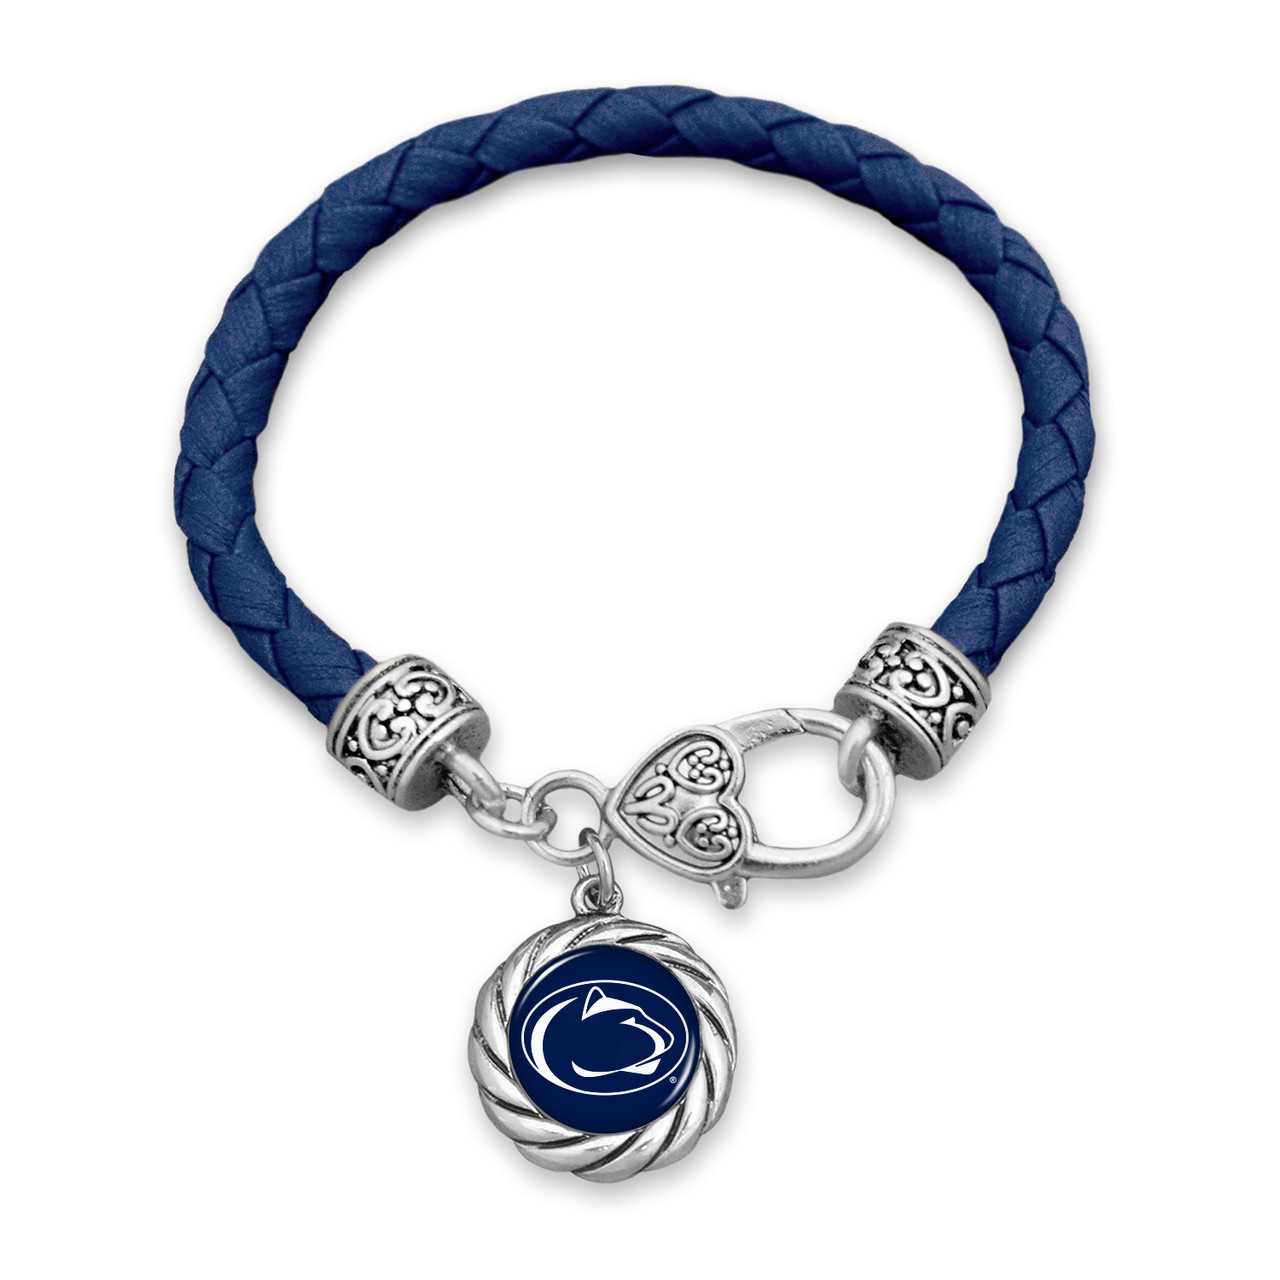 Penn State Nittany Lions Bracelet- Harvey Leather Twisted Rope